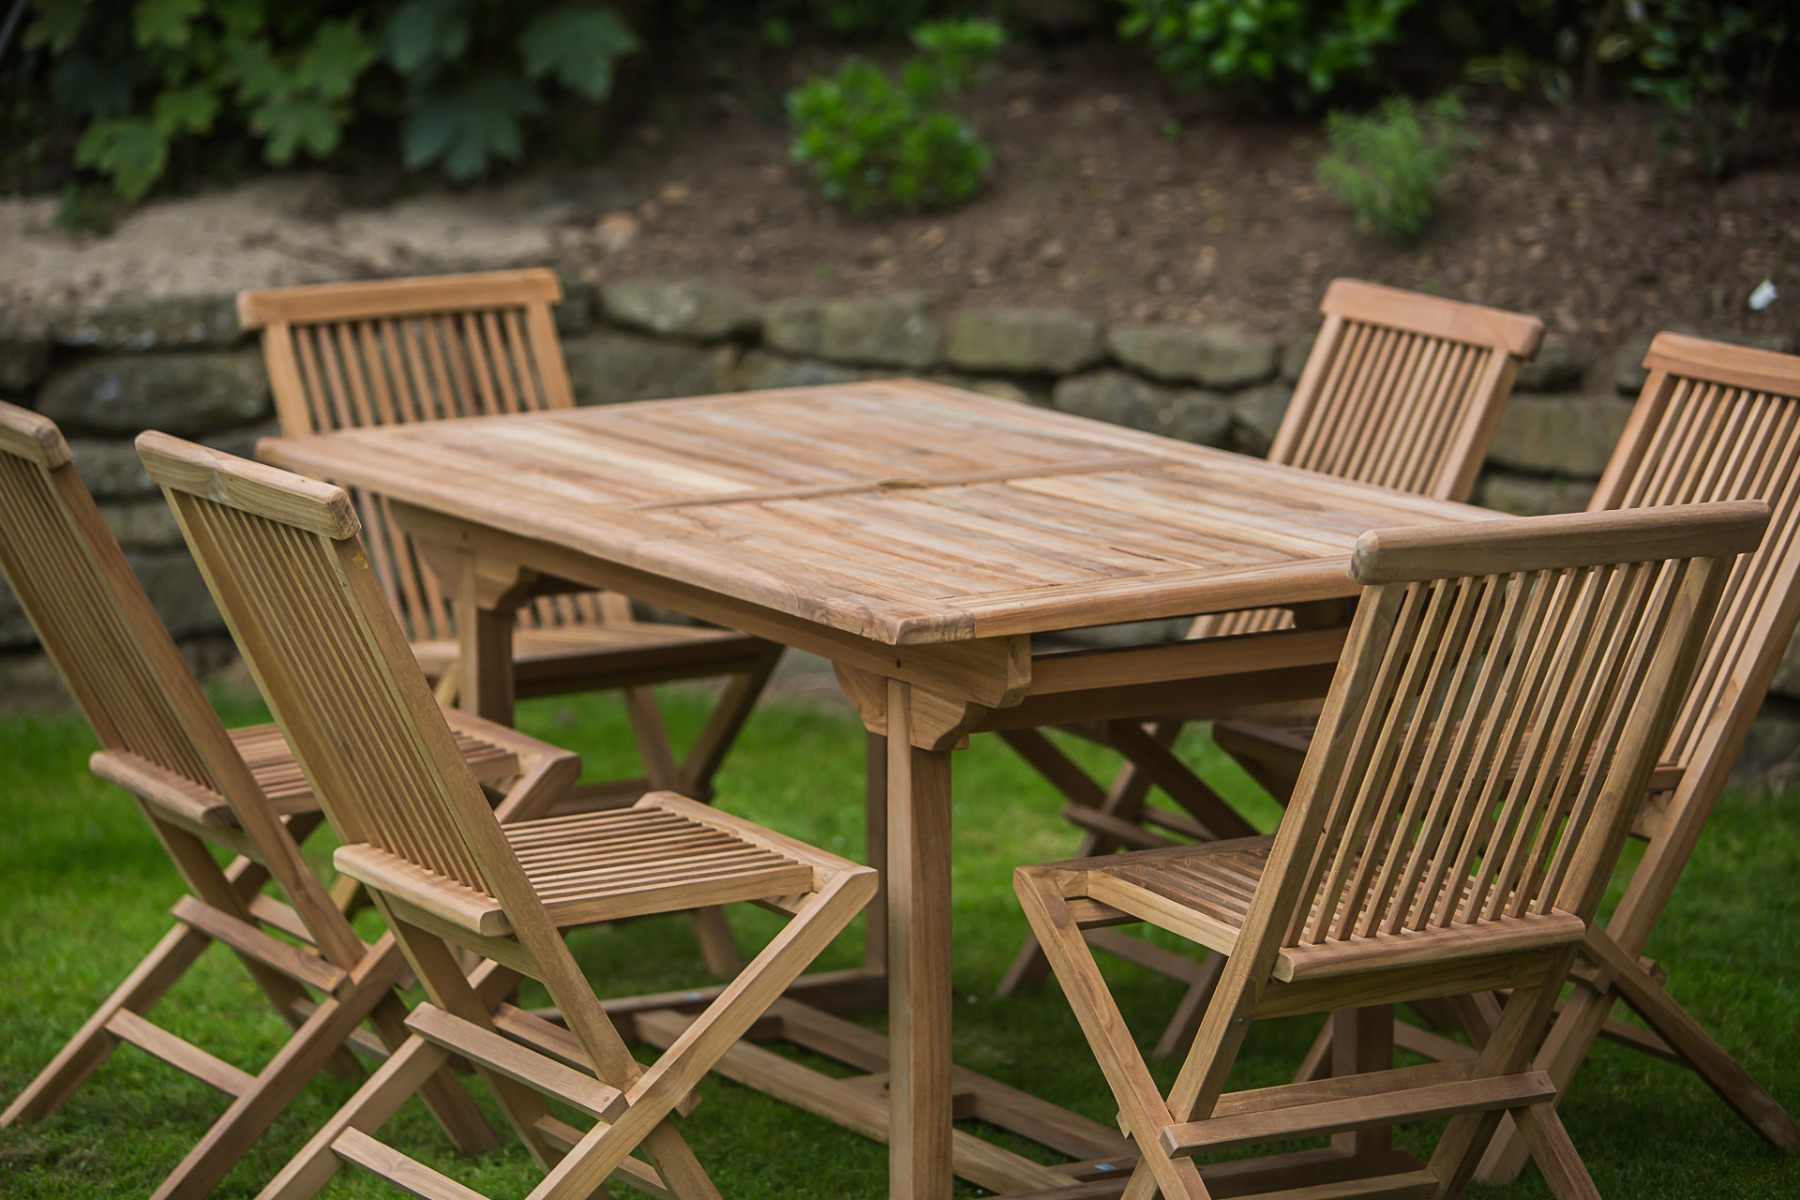 The Benefits Of Bulk Teak Furniture For Your Outdoor Space